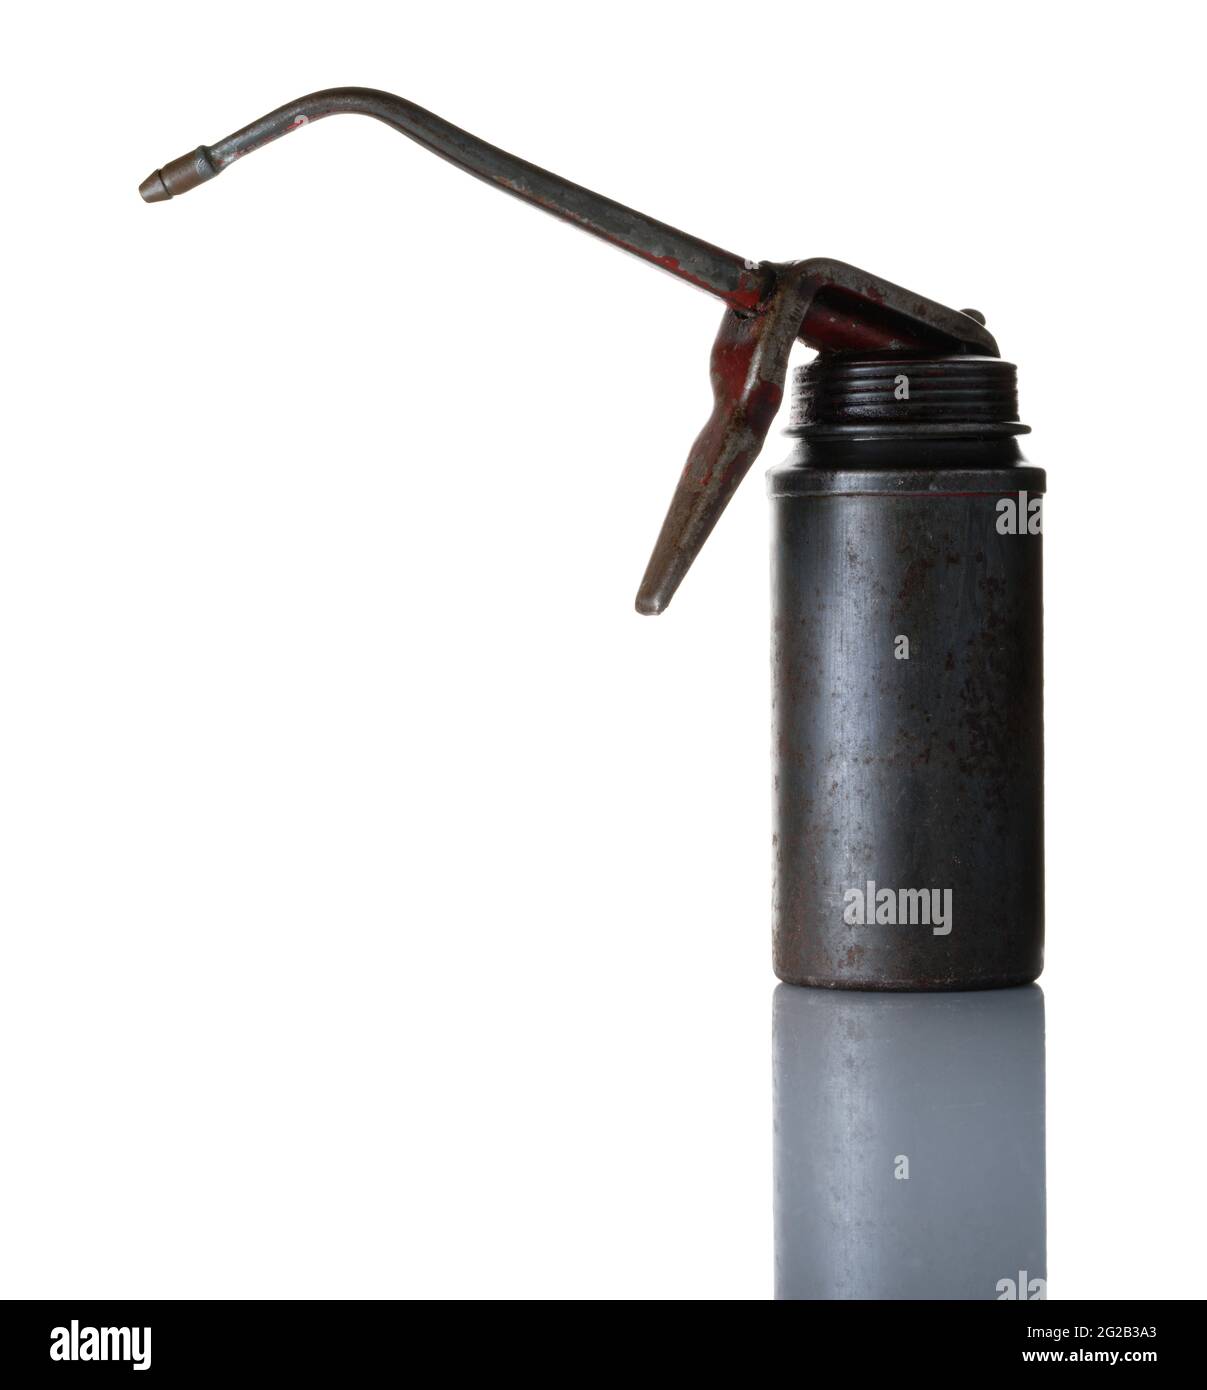 An old oil can with trigger for squirting oil out of long spout. Stock Photo